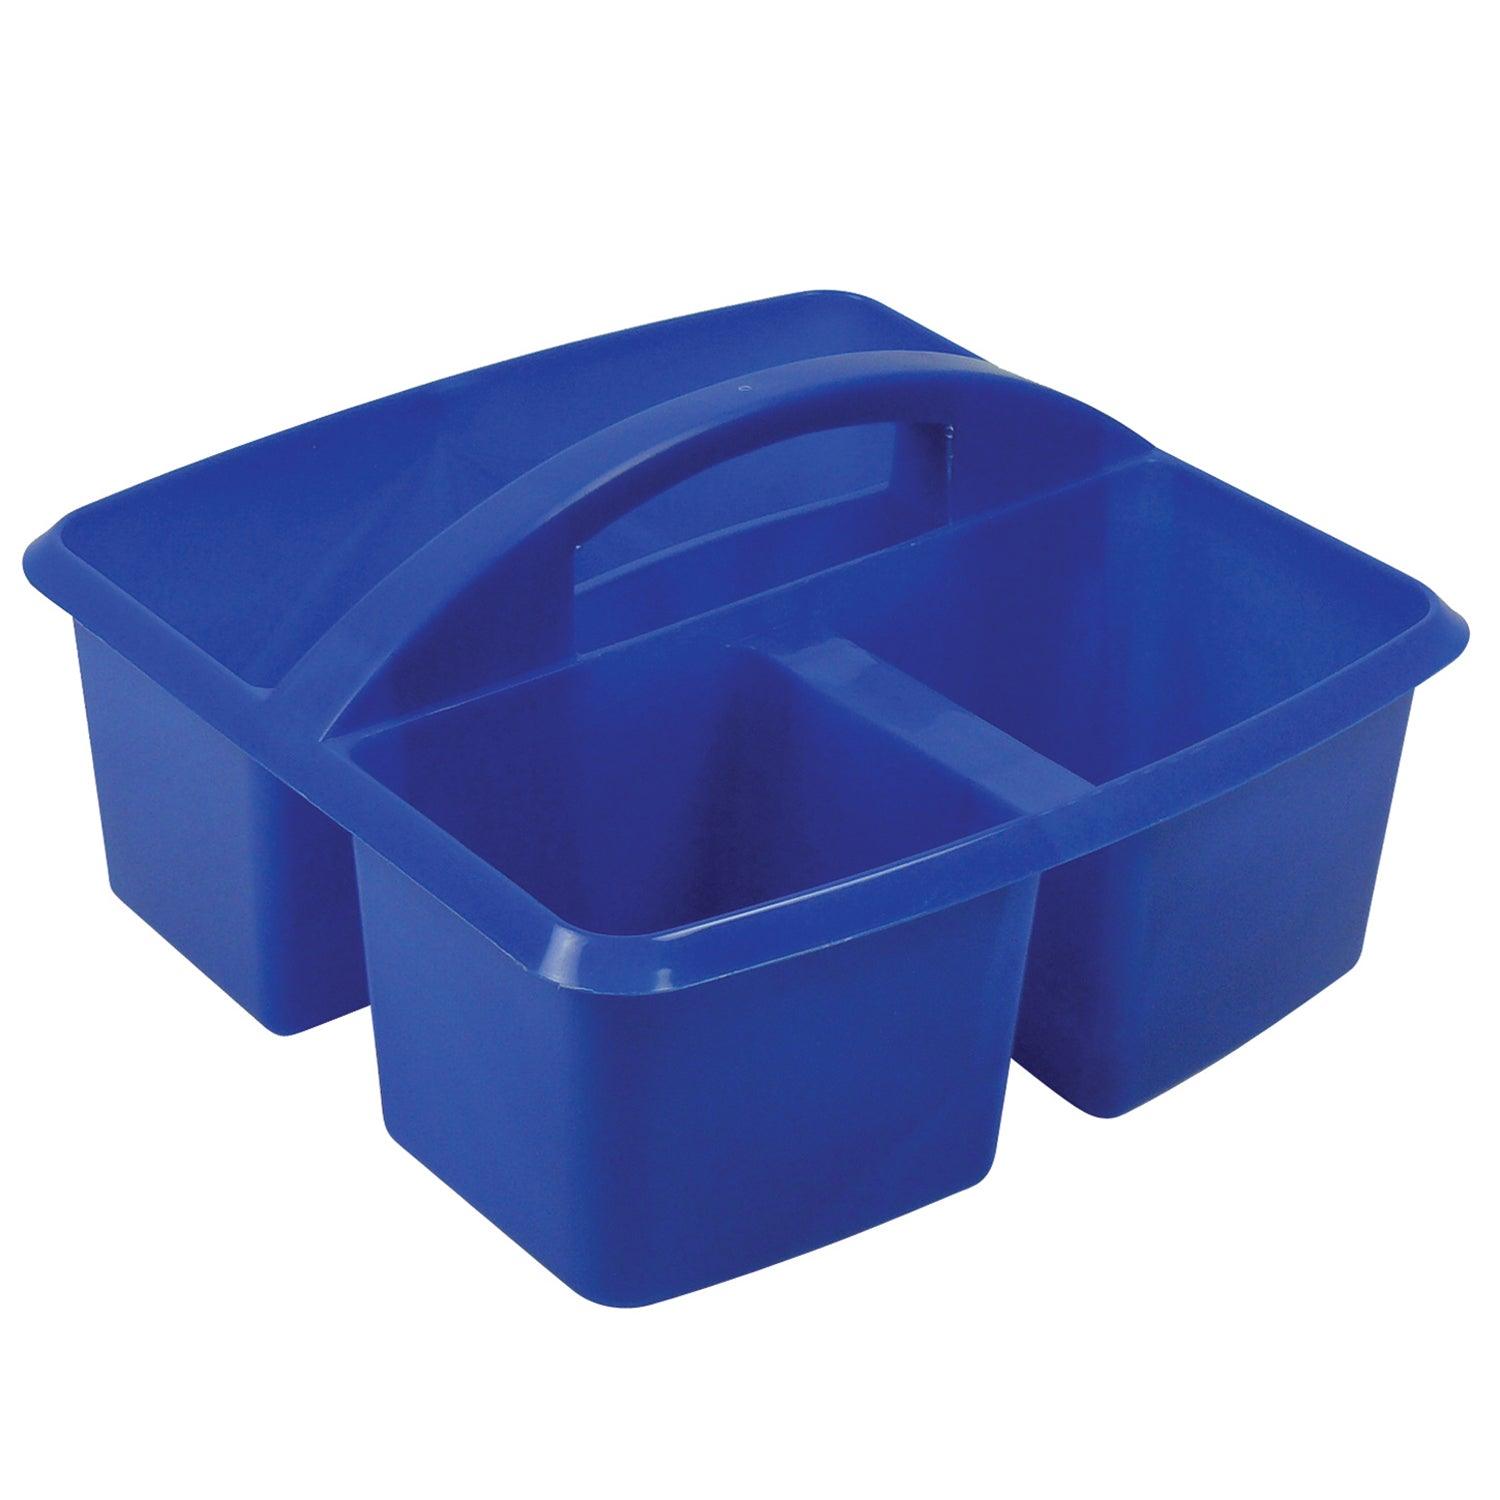 Small Utility Caddy, Blue, Pack of 6 - Loomini